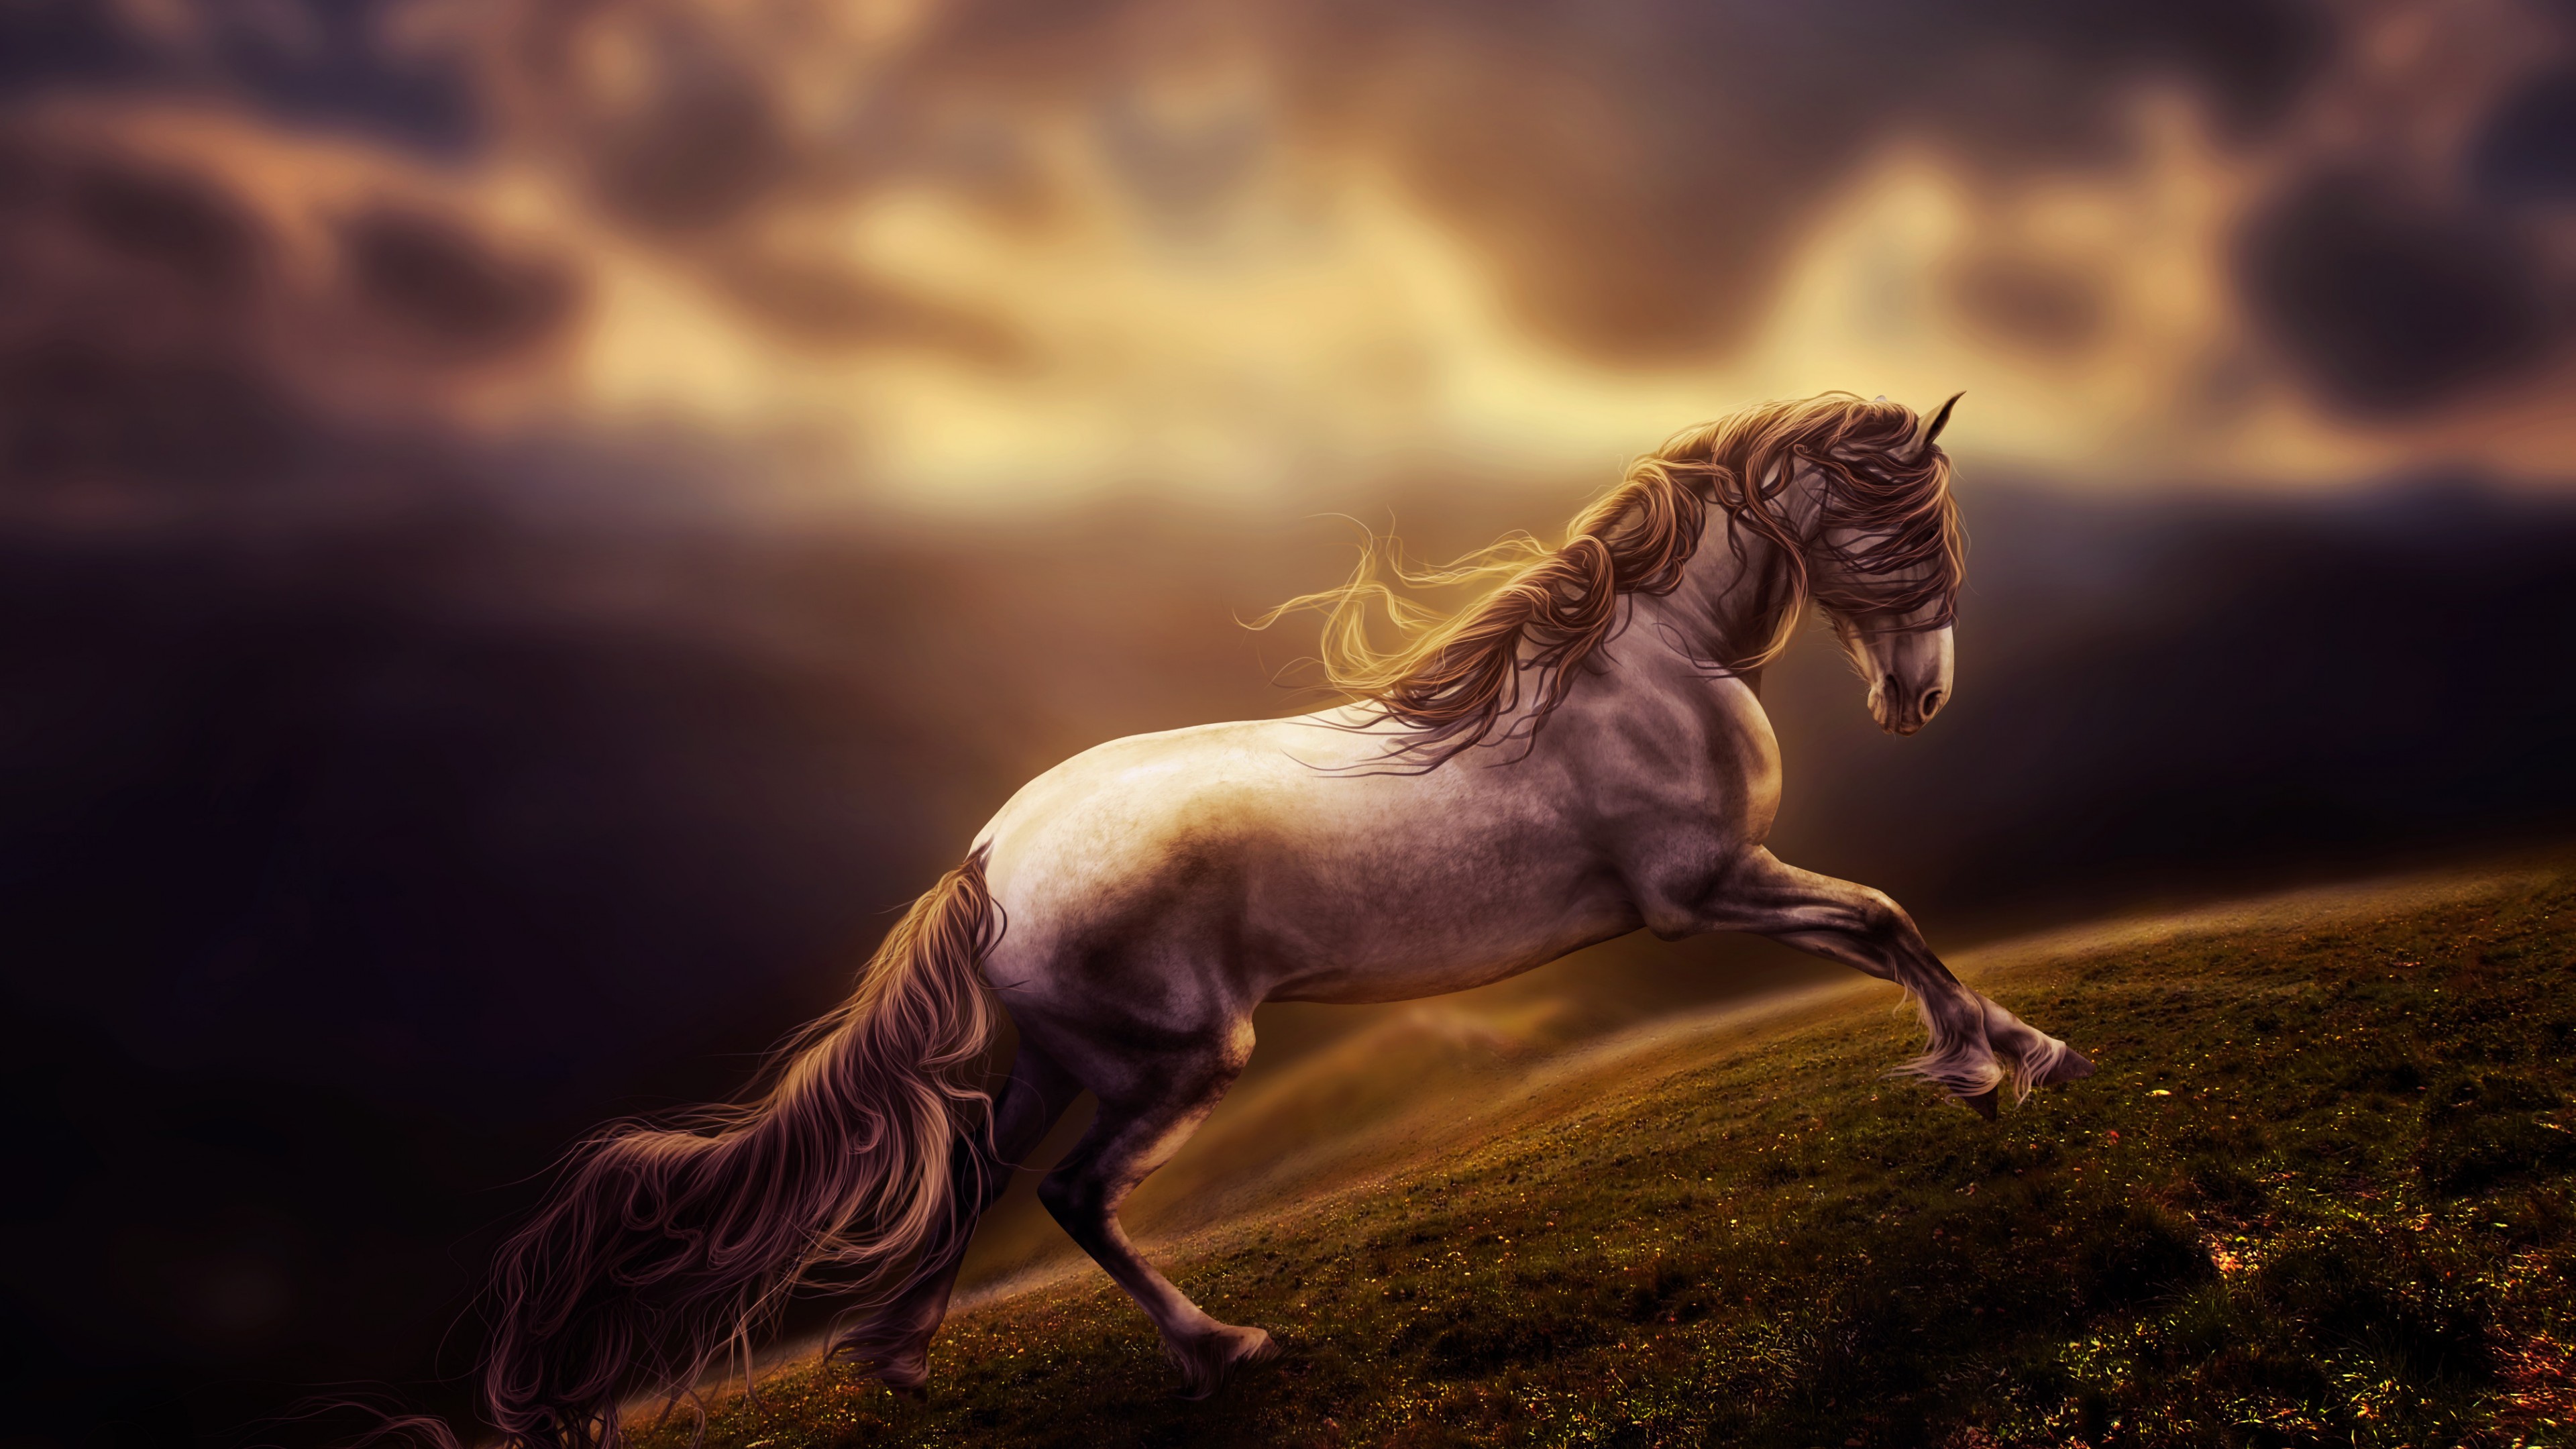 400+ of the Best HD Horse Wallpapers for Free - Pixabay